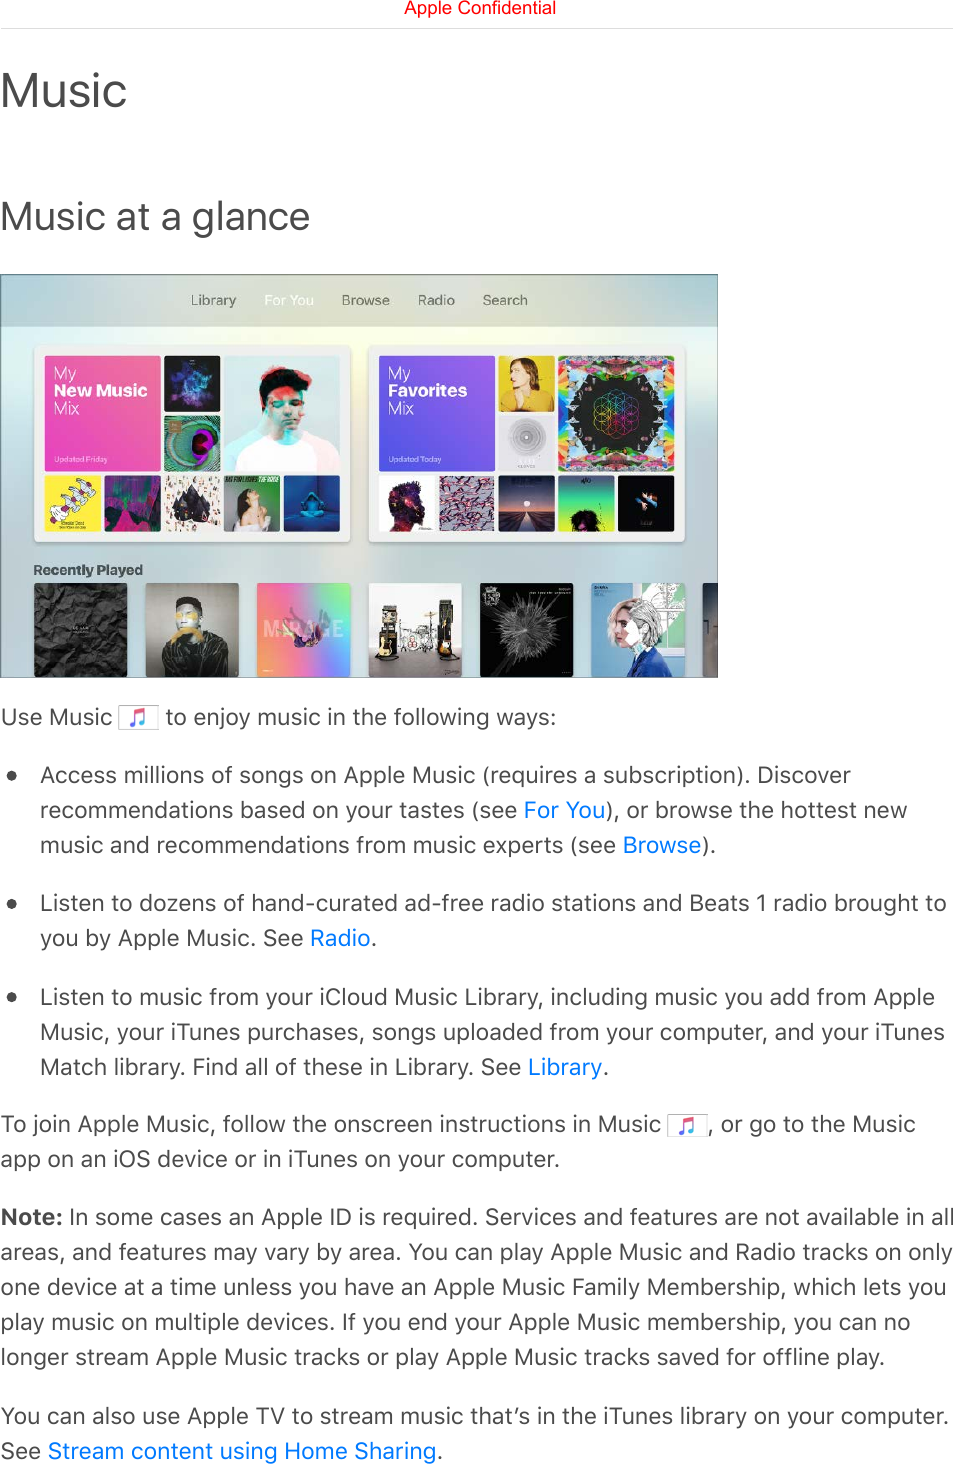 Music at a glanceUse Music   to enjoy music in the following ways:Access millions of songs on Apple Music (requires a subscription). Discoverrecommendations based on your tastes (see  ), or browse the hottest newmusic and recommendations from music experts (see  ).Listen to dozens of hand-curated ad-free radio stations and Beats 1 radio brought toyou by Apple Music. See  .Listen to music from your iCloud Music Library, including music you add from AppleMusic, your iTunes purchases, songs uploaded from your computer, and your iTunesMatch library. Find all of these in Library. See  .To join Apple Music, follow the onscreen instructions in Music  , or go to the Musicapp on an iOS device or in iTunes on your computer.Note: In some cases an Apple ID is required. Services and features are not available in allareas, and features may vary by area. You can play Apple Music and Radio tracks on onlyone device at a time unless you have an Apple Music Family Membership, which lets youplay music on multiple devices. If you end your Apple Music membership, you can nolonger stream Apple Music tracks or play Apple Music tracks saved for offline play.You can also use Apple TV to stream music thatʼs in the iTunes library on your computer.See  .MusicFor YouBrowseRadioLibraryStream content using Home SharingApple Confidential